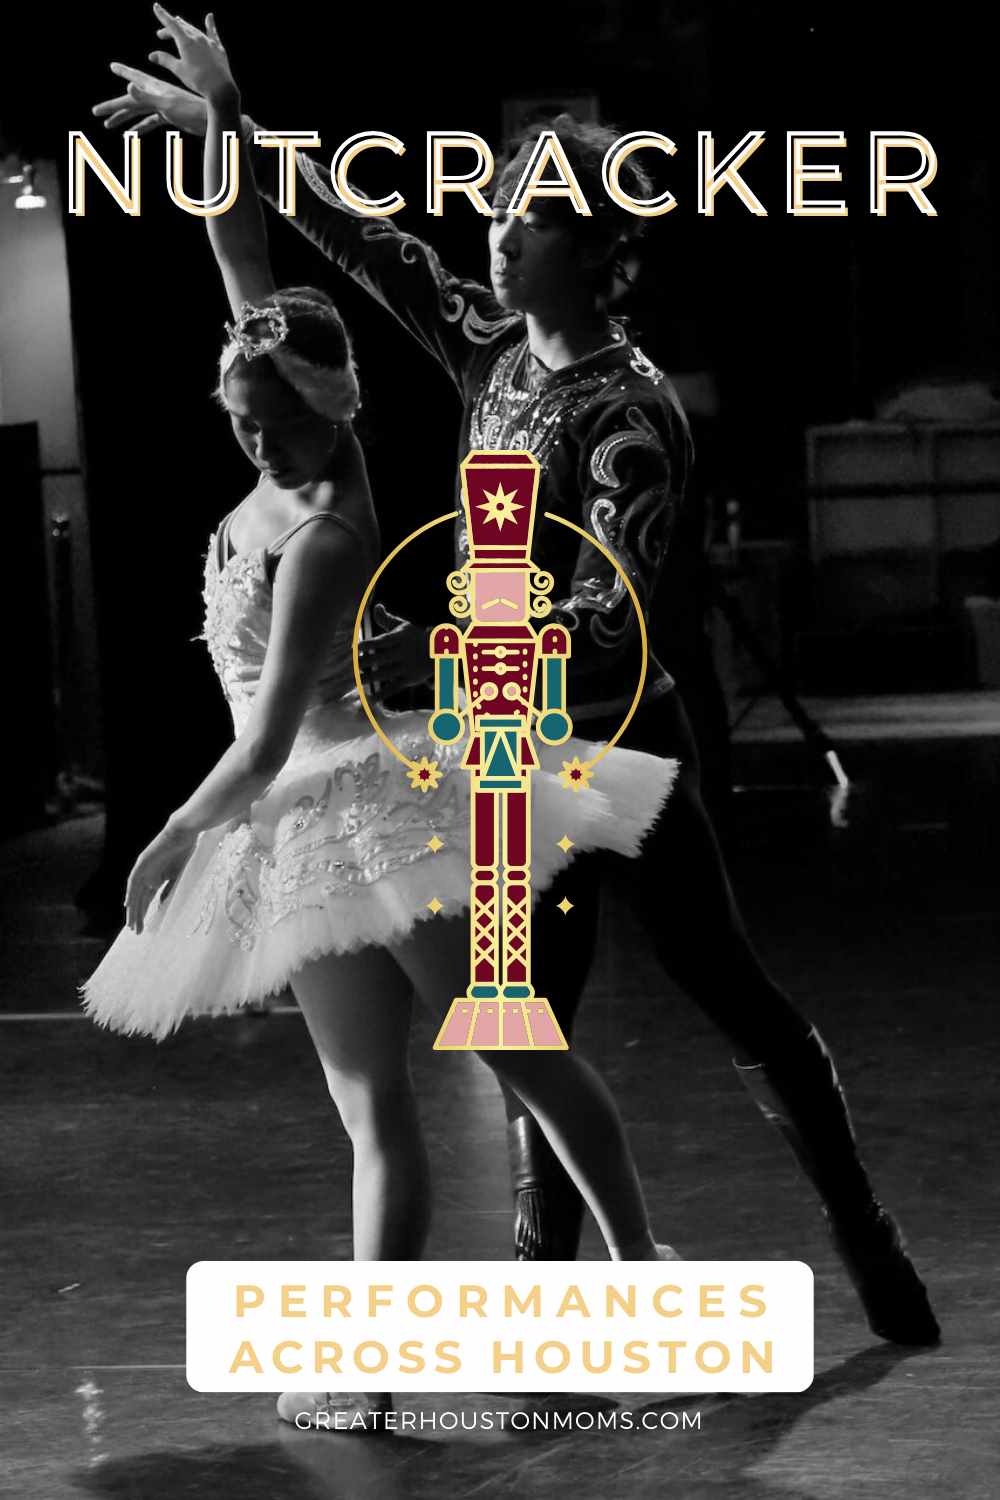 The Nutcracker in Houston - Find Performances for all ages!